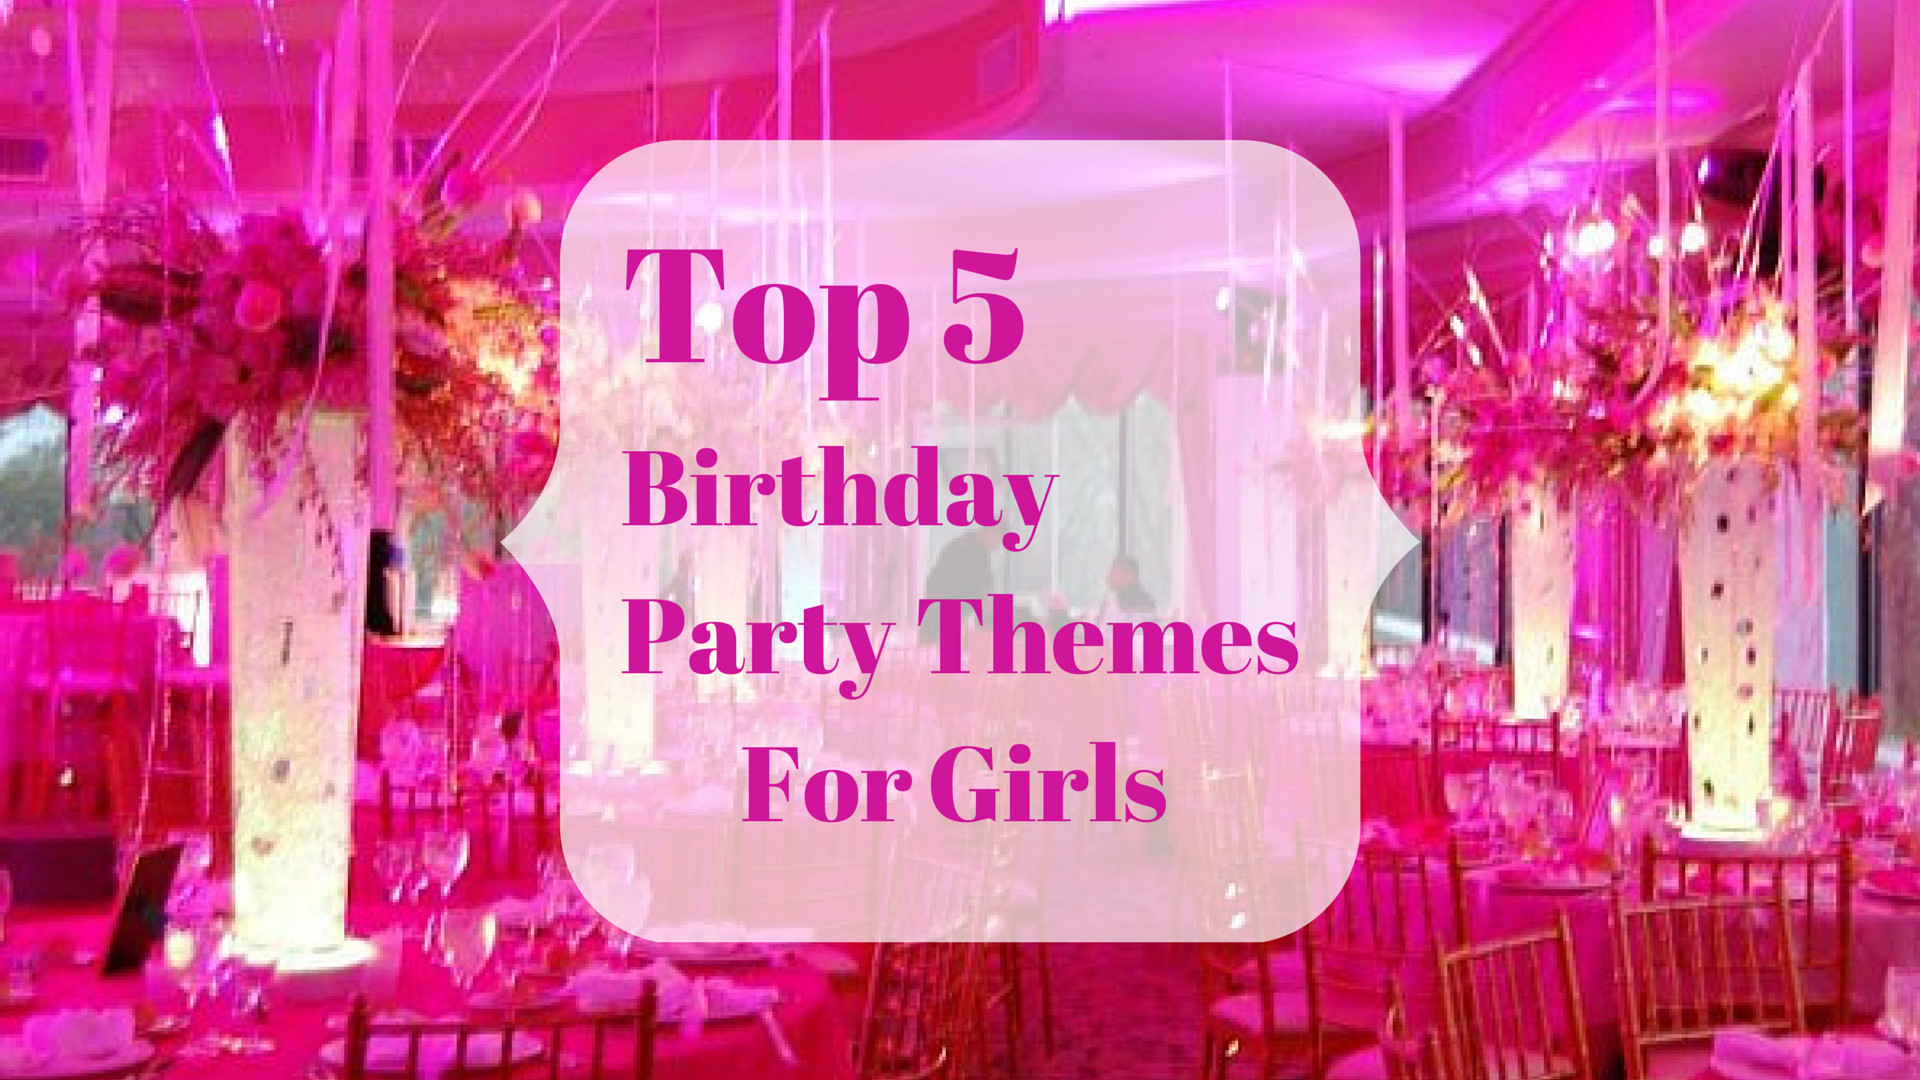 5 Year Old Girl Birthday Party Ideas
 Top 5 Girl Party Themes